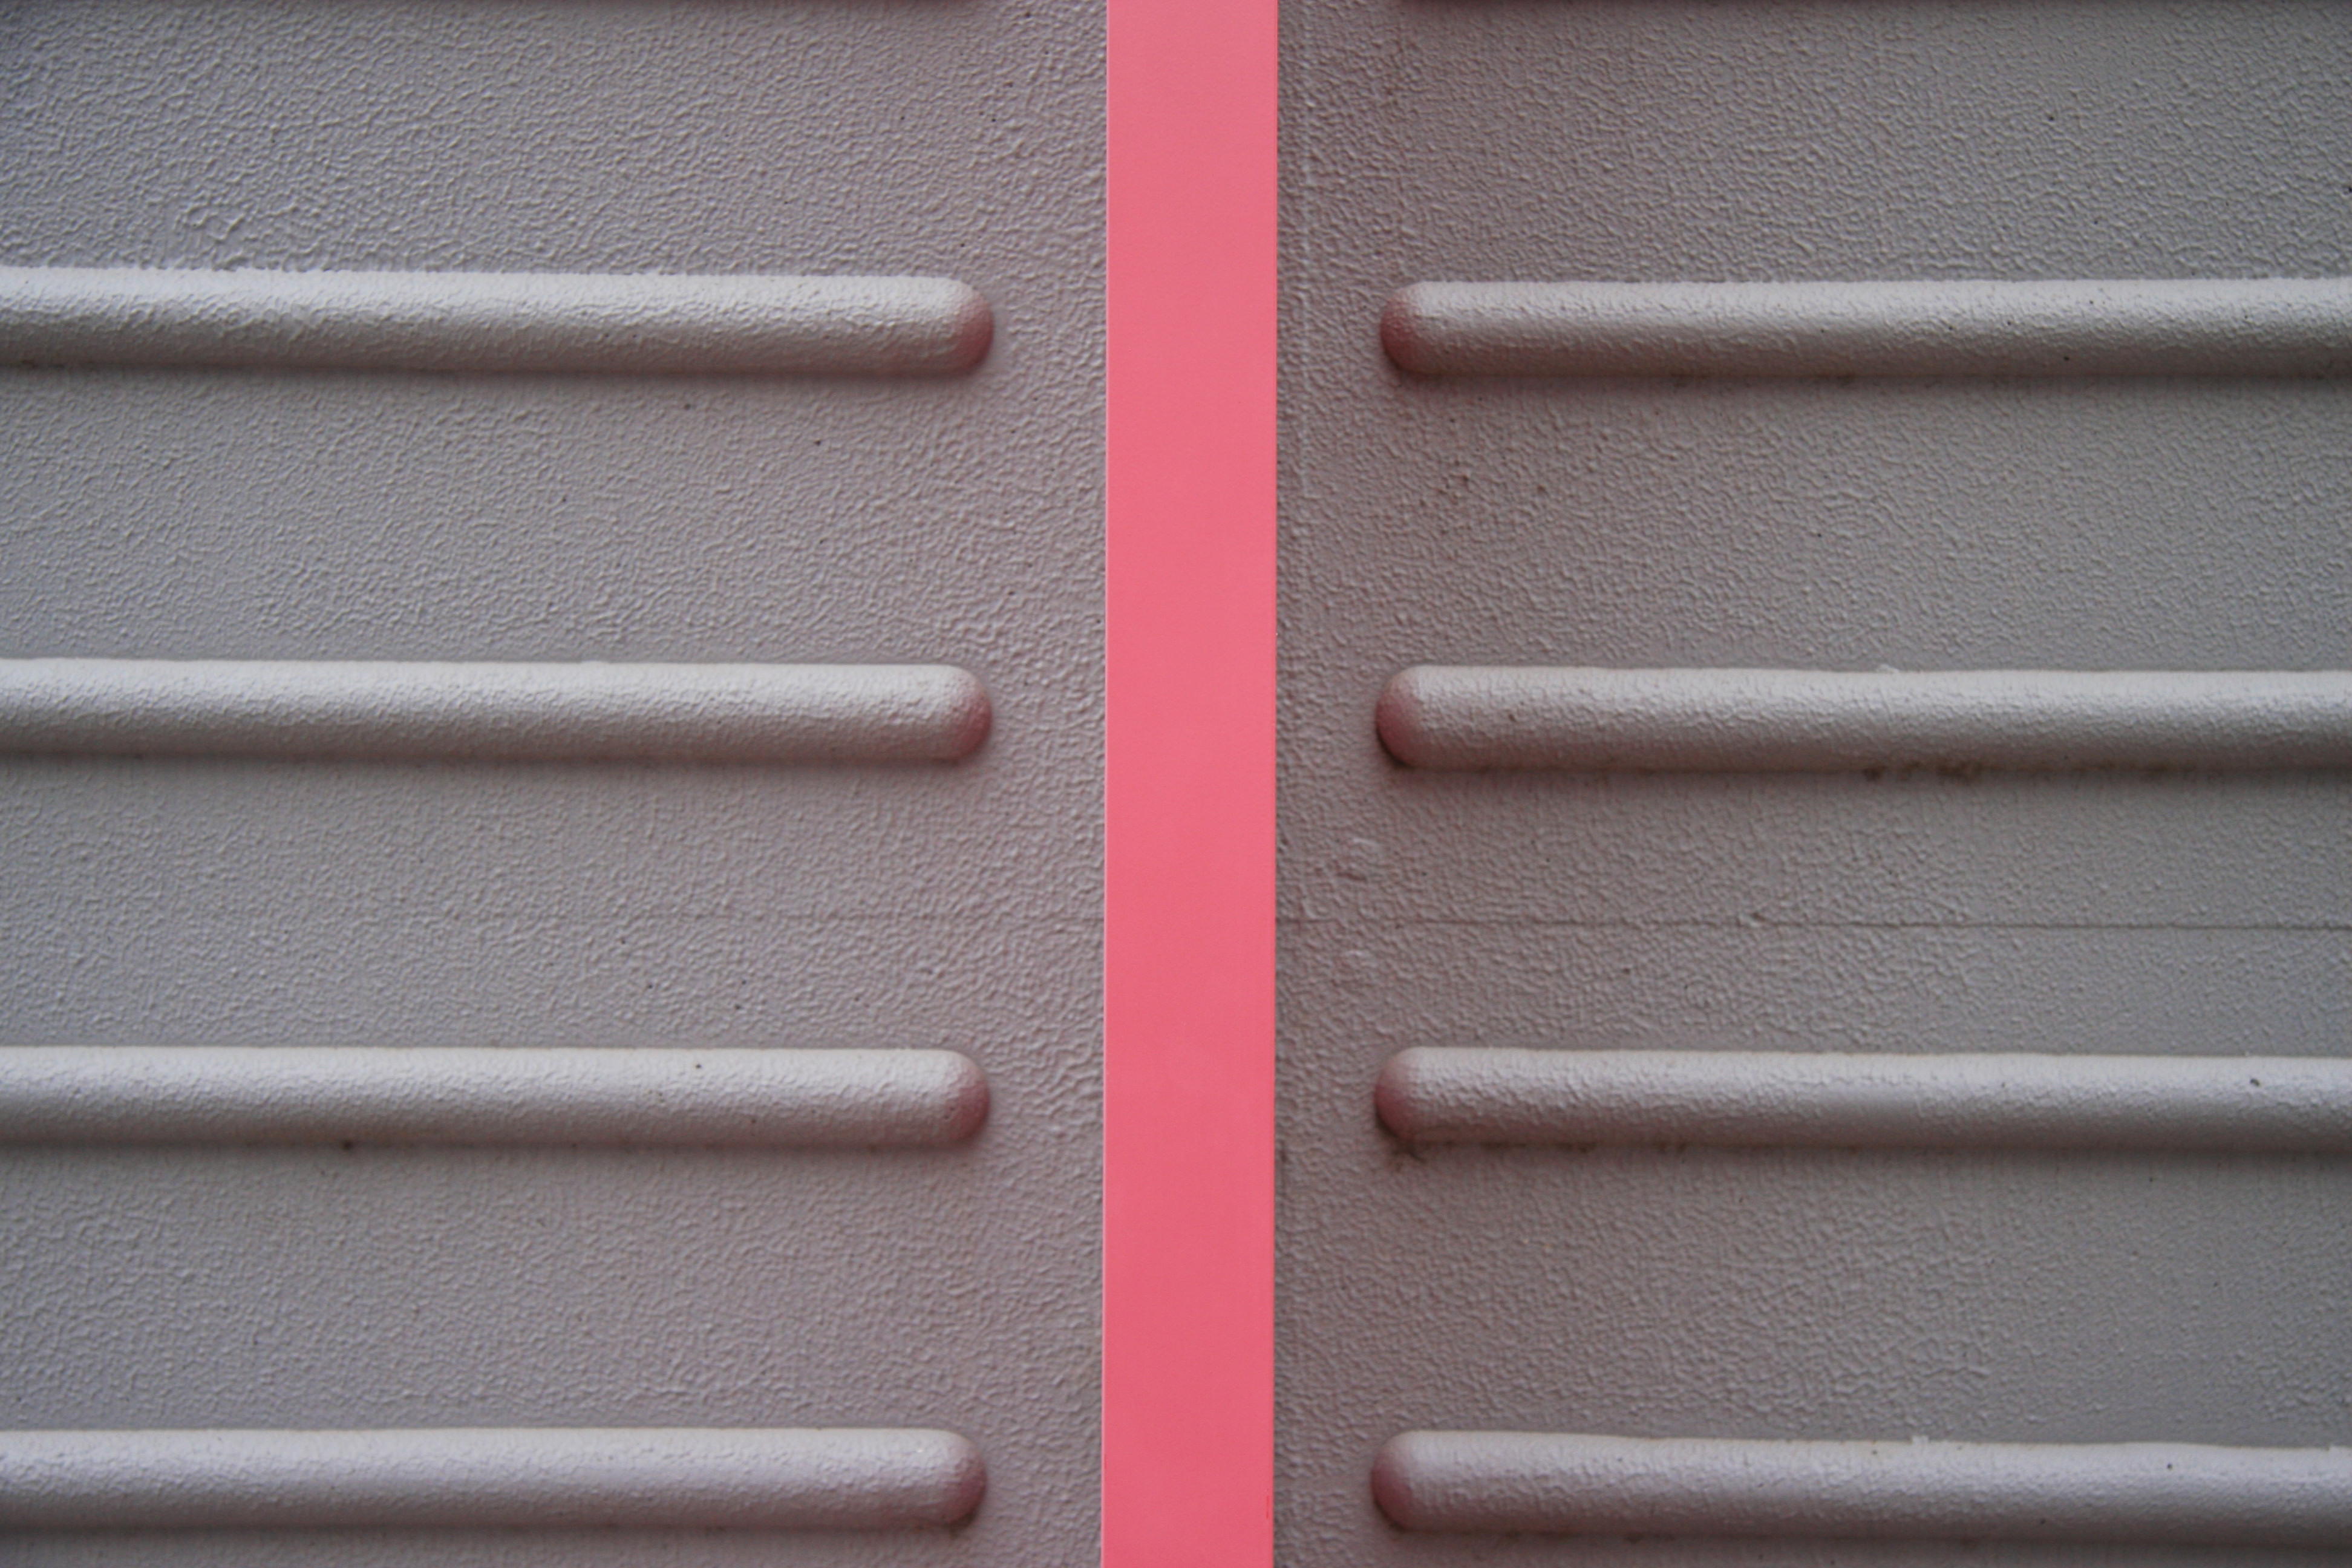 20 June Composition of Pink and Grey